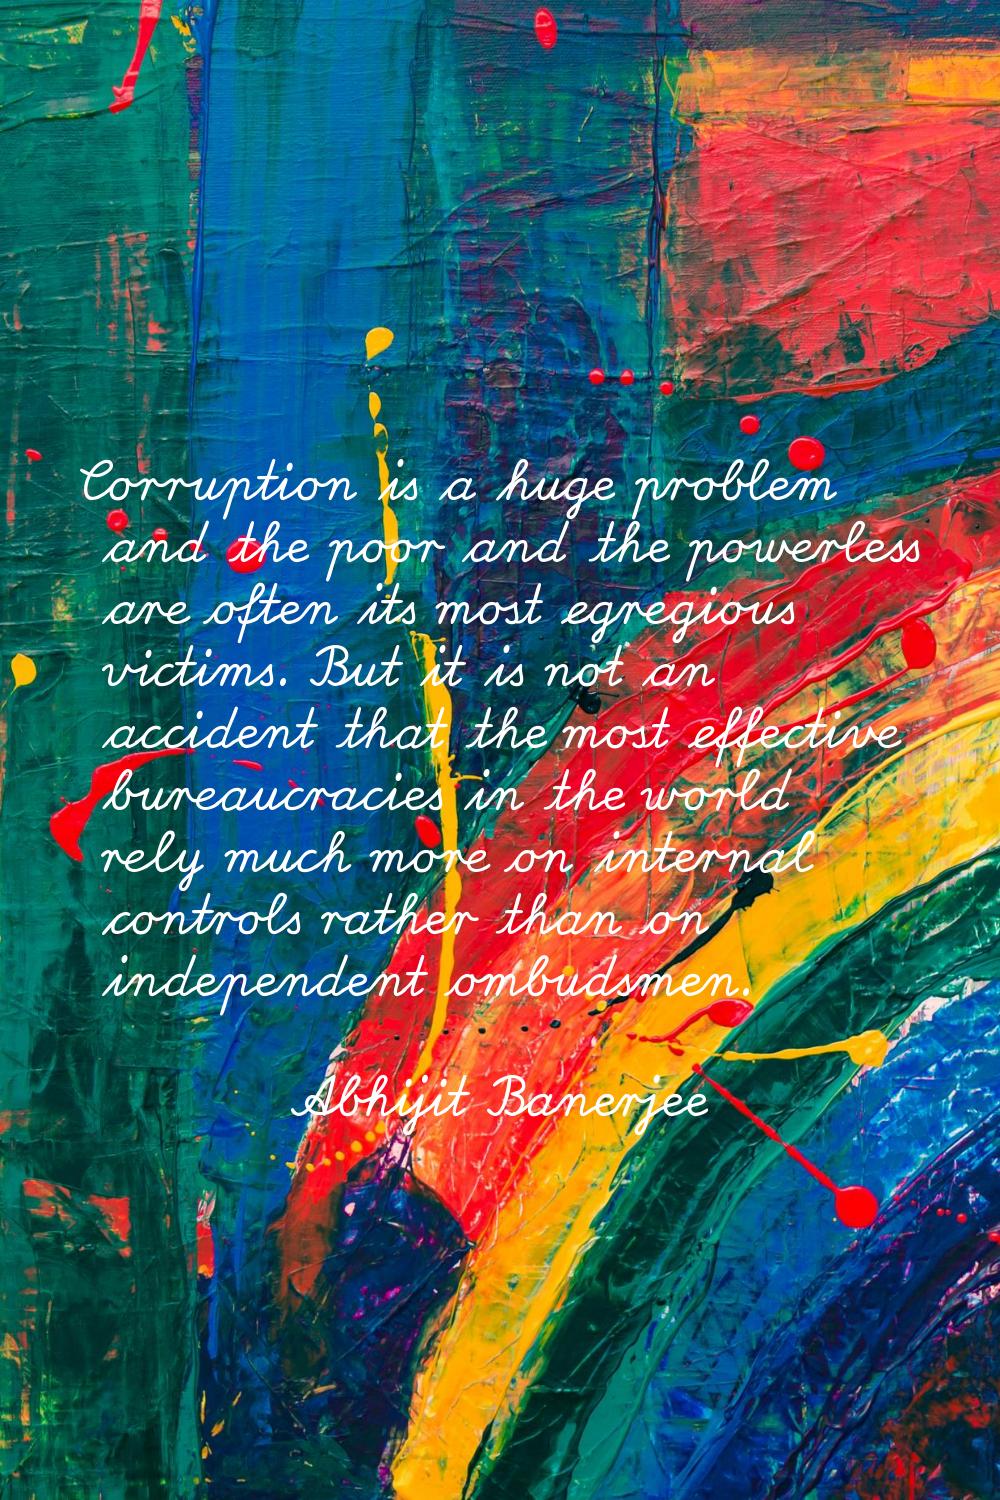 Corruption is a huge problem and the poor and the powerless are often its most egregious victims. B